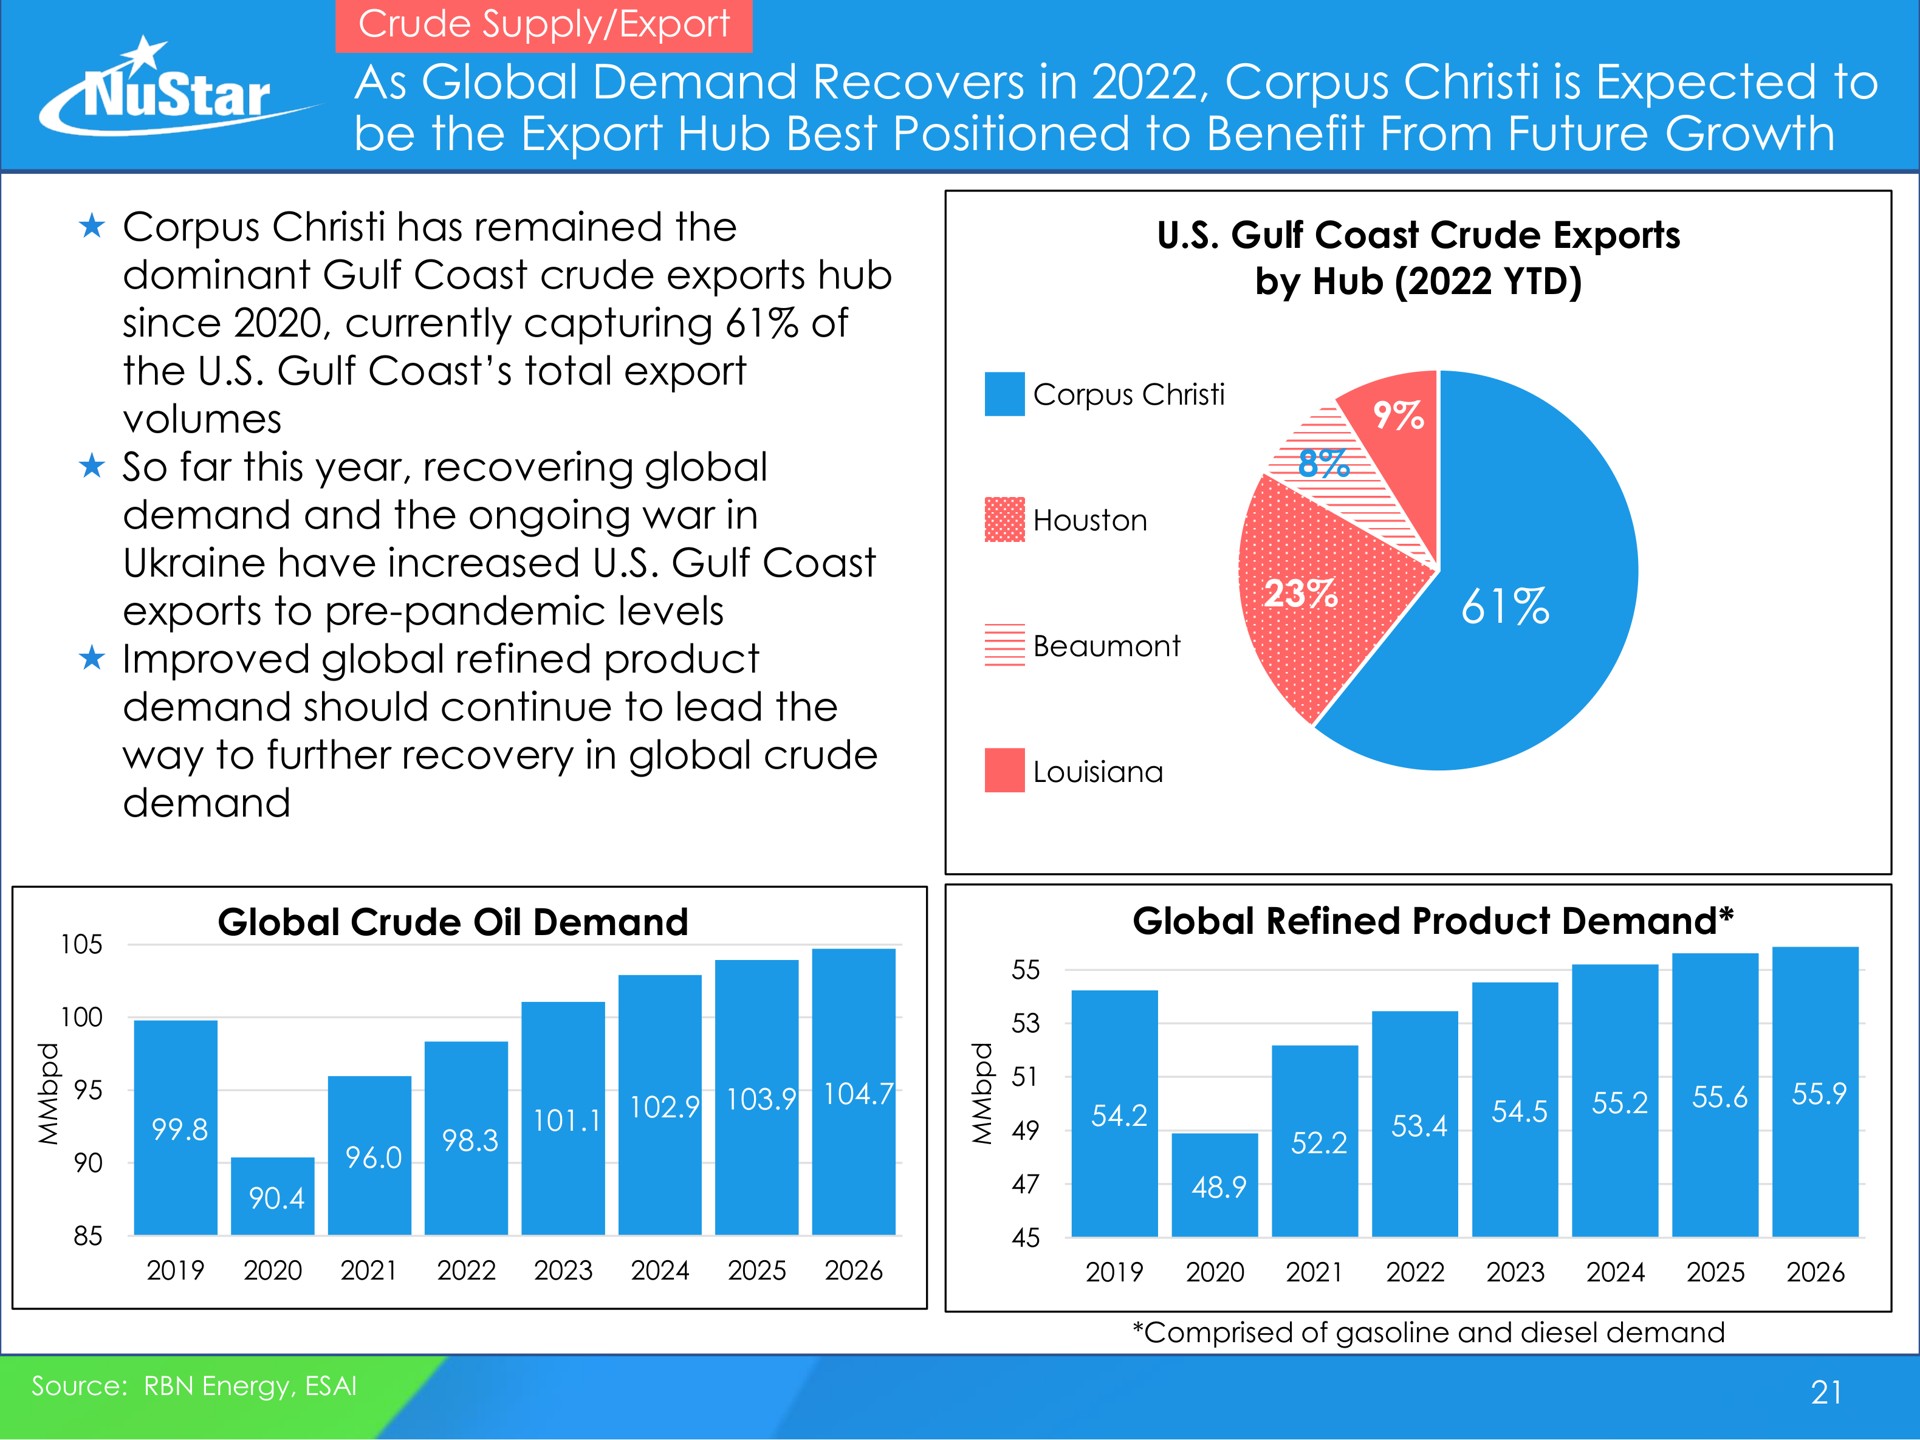 as global demand recovers in corpus is expected to be the export hub best positioned to benefit from future growth | NuStar Energy